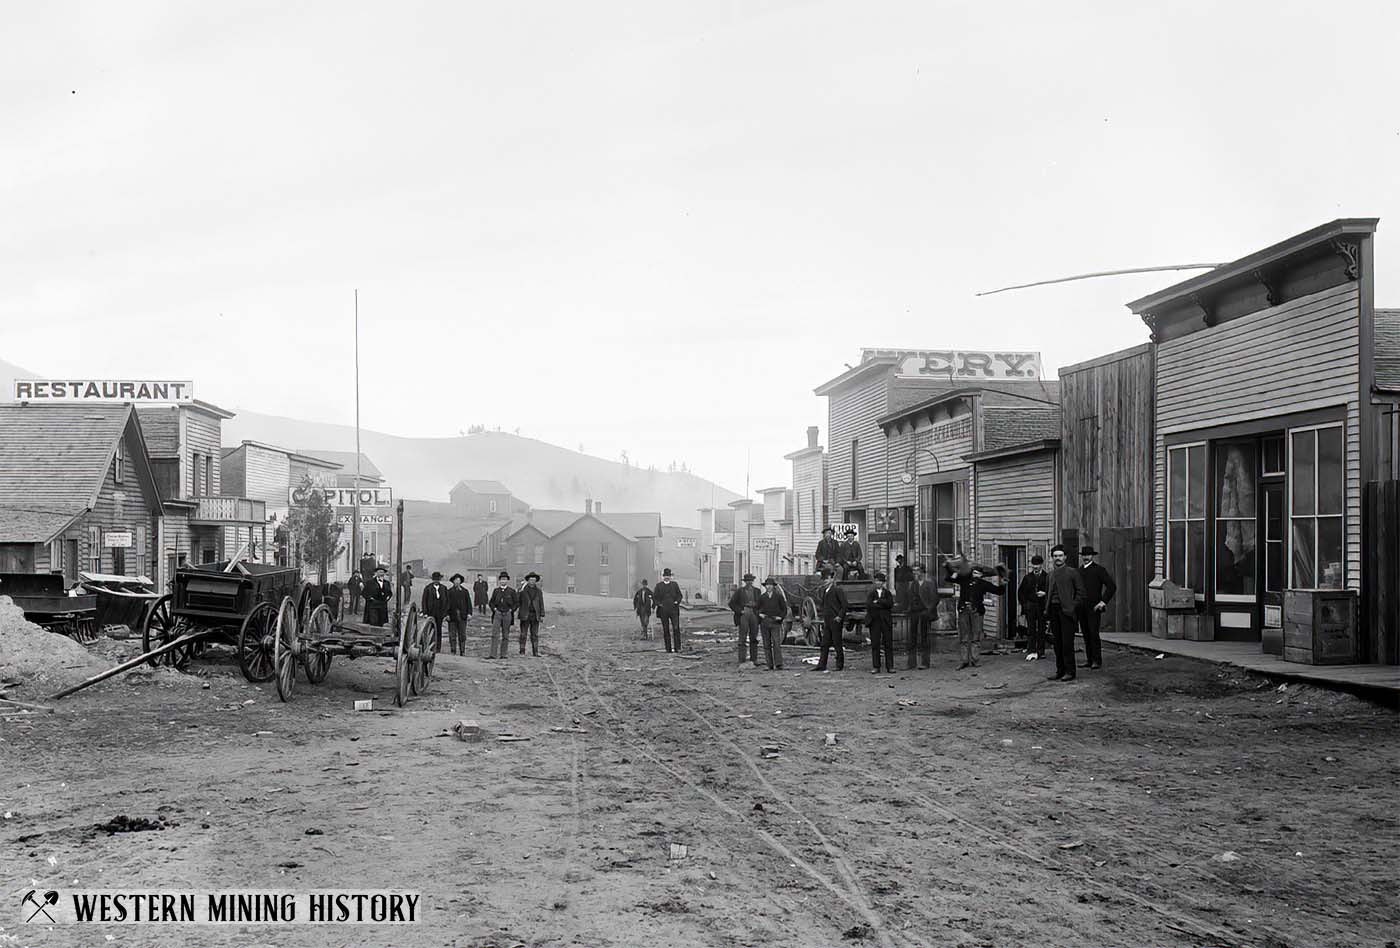 Featured Mining Town: Wickes, Montana